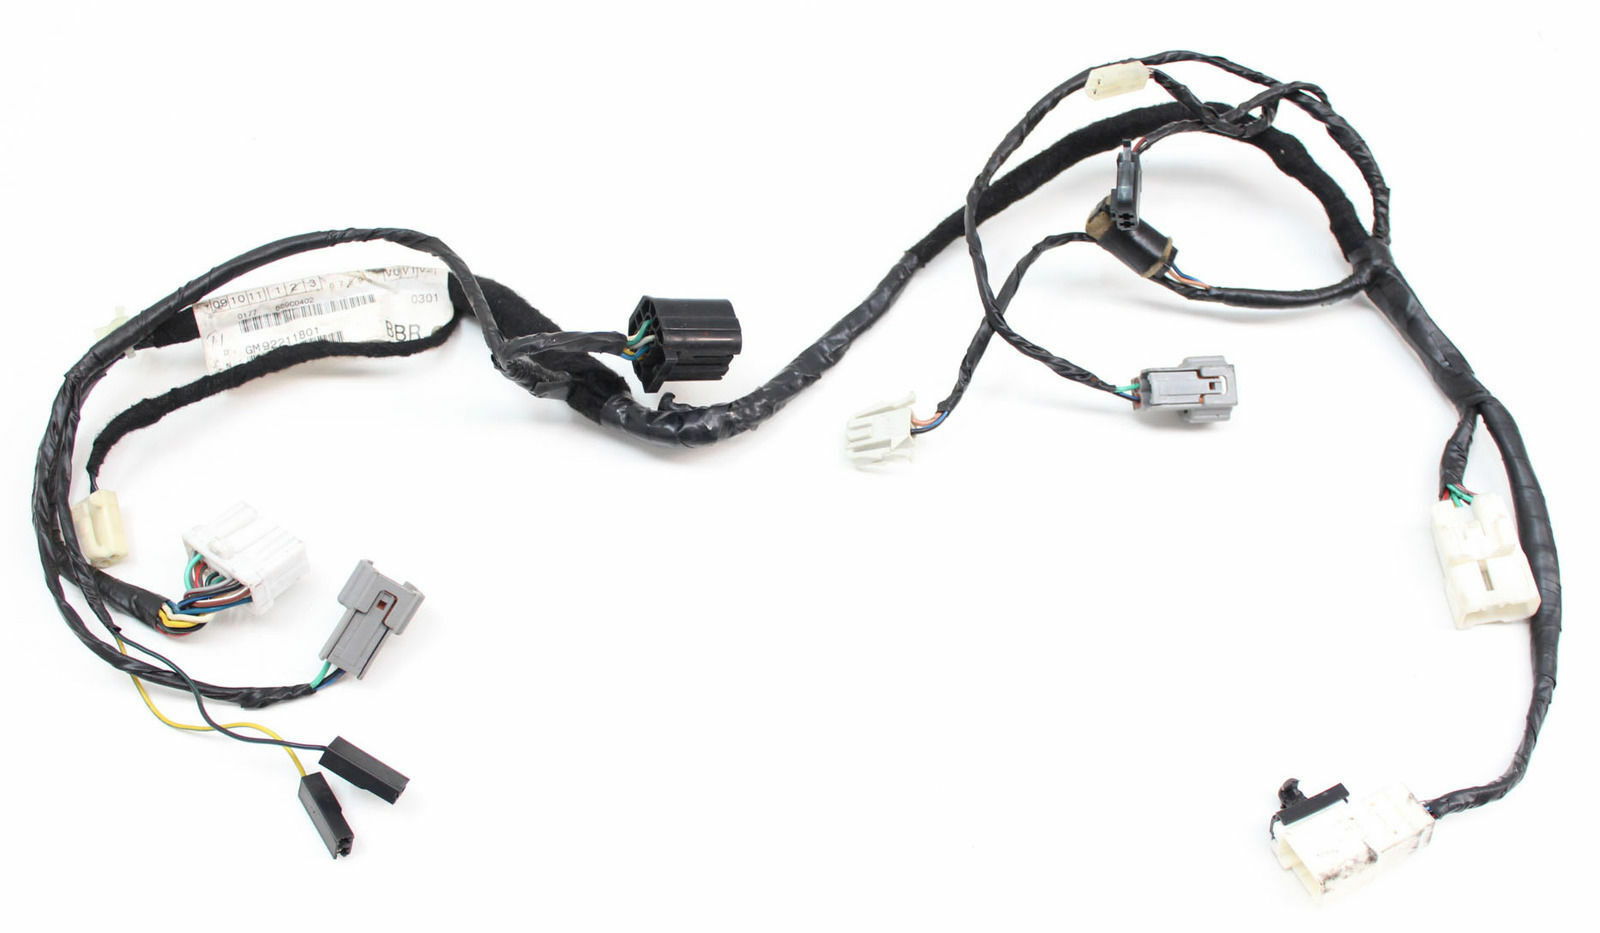 VZ,Tail Gate Wiring Loom,Holden,Commodore,Genuine,Wagon 92211801,